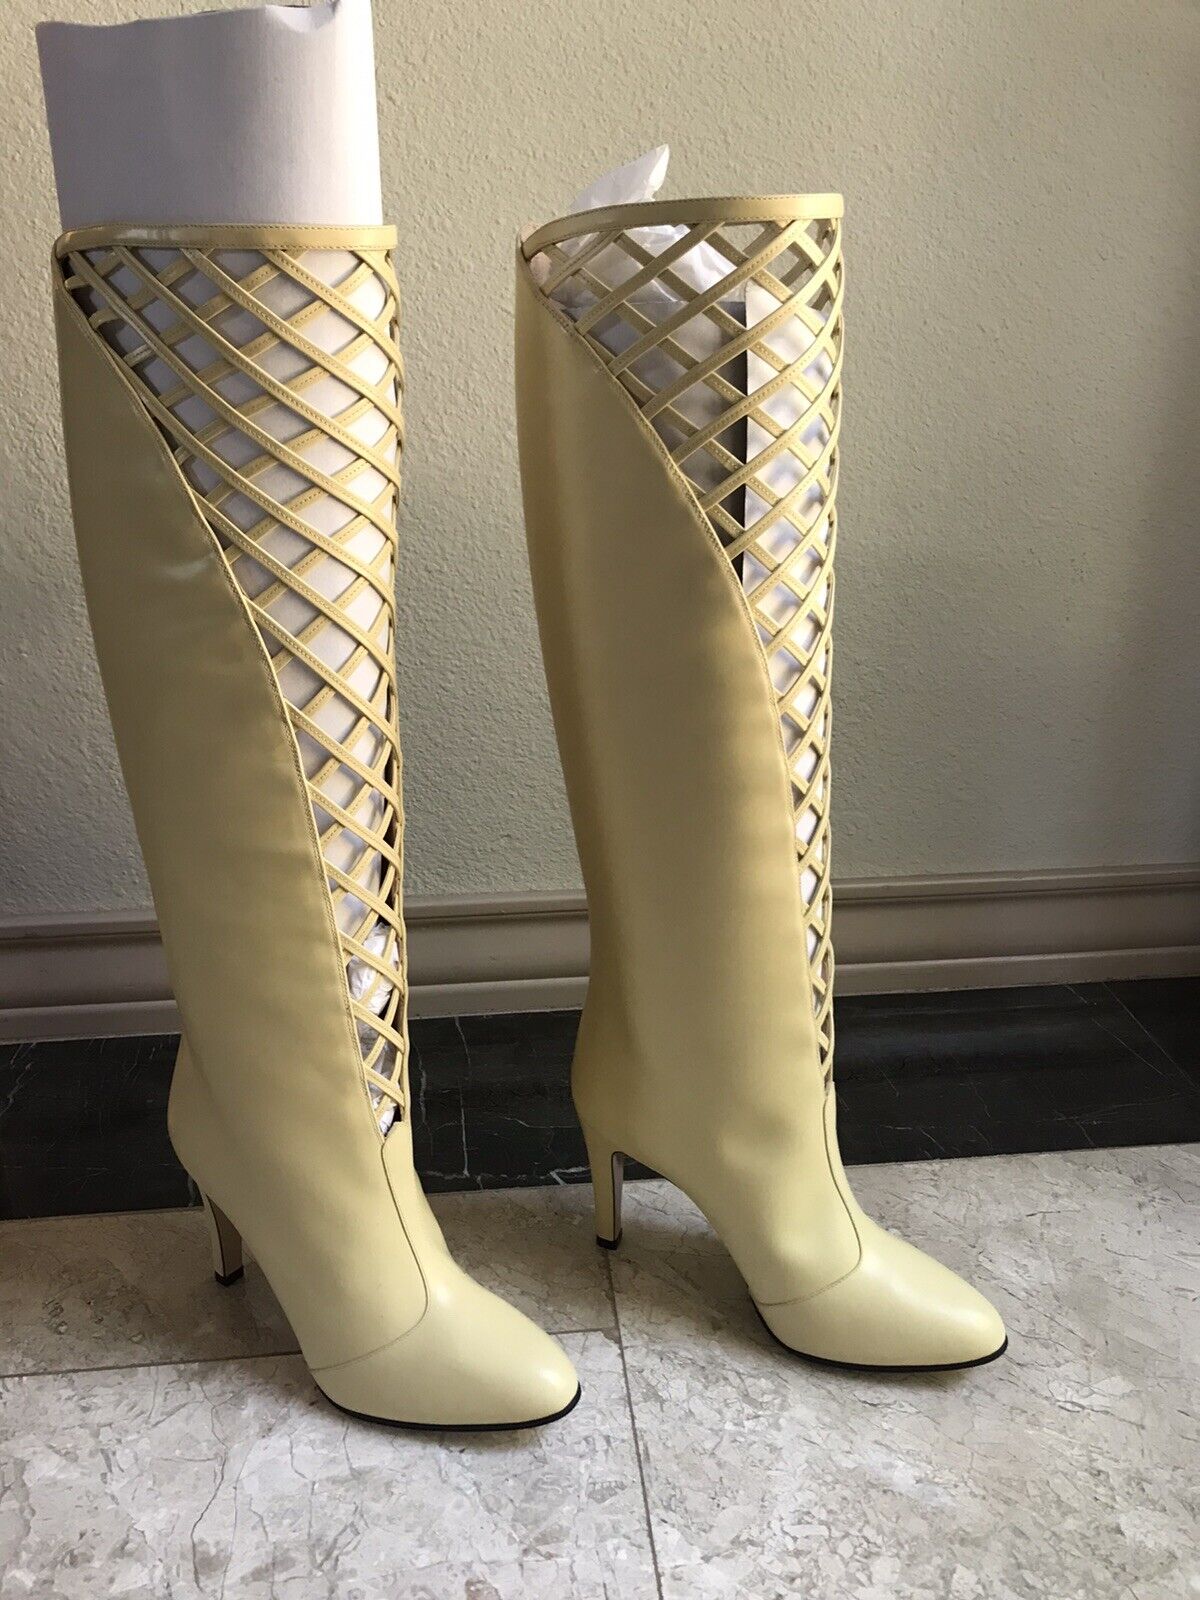 BRAND NEW ! GUCCI Ivory Leather Lattice Knee-High Boots N5552 Size 39 EU,  8.5 US